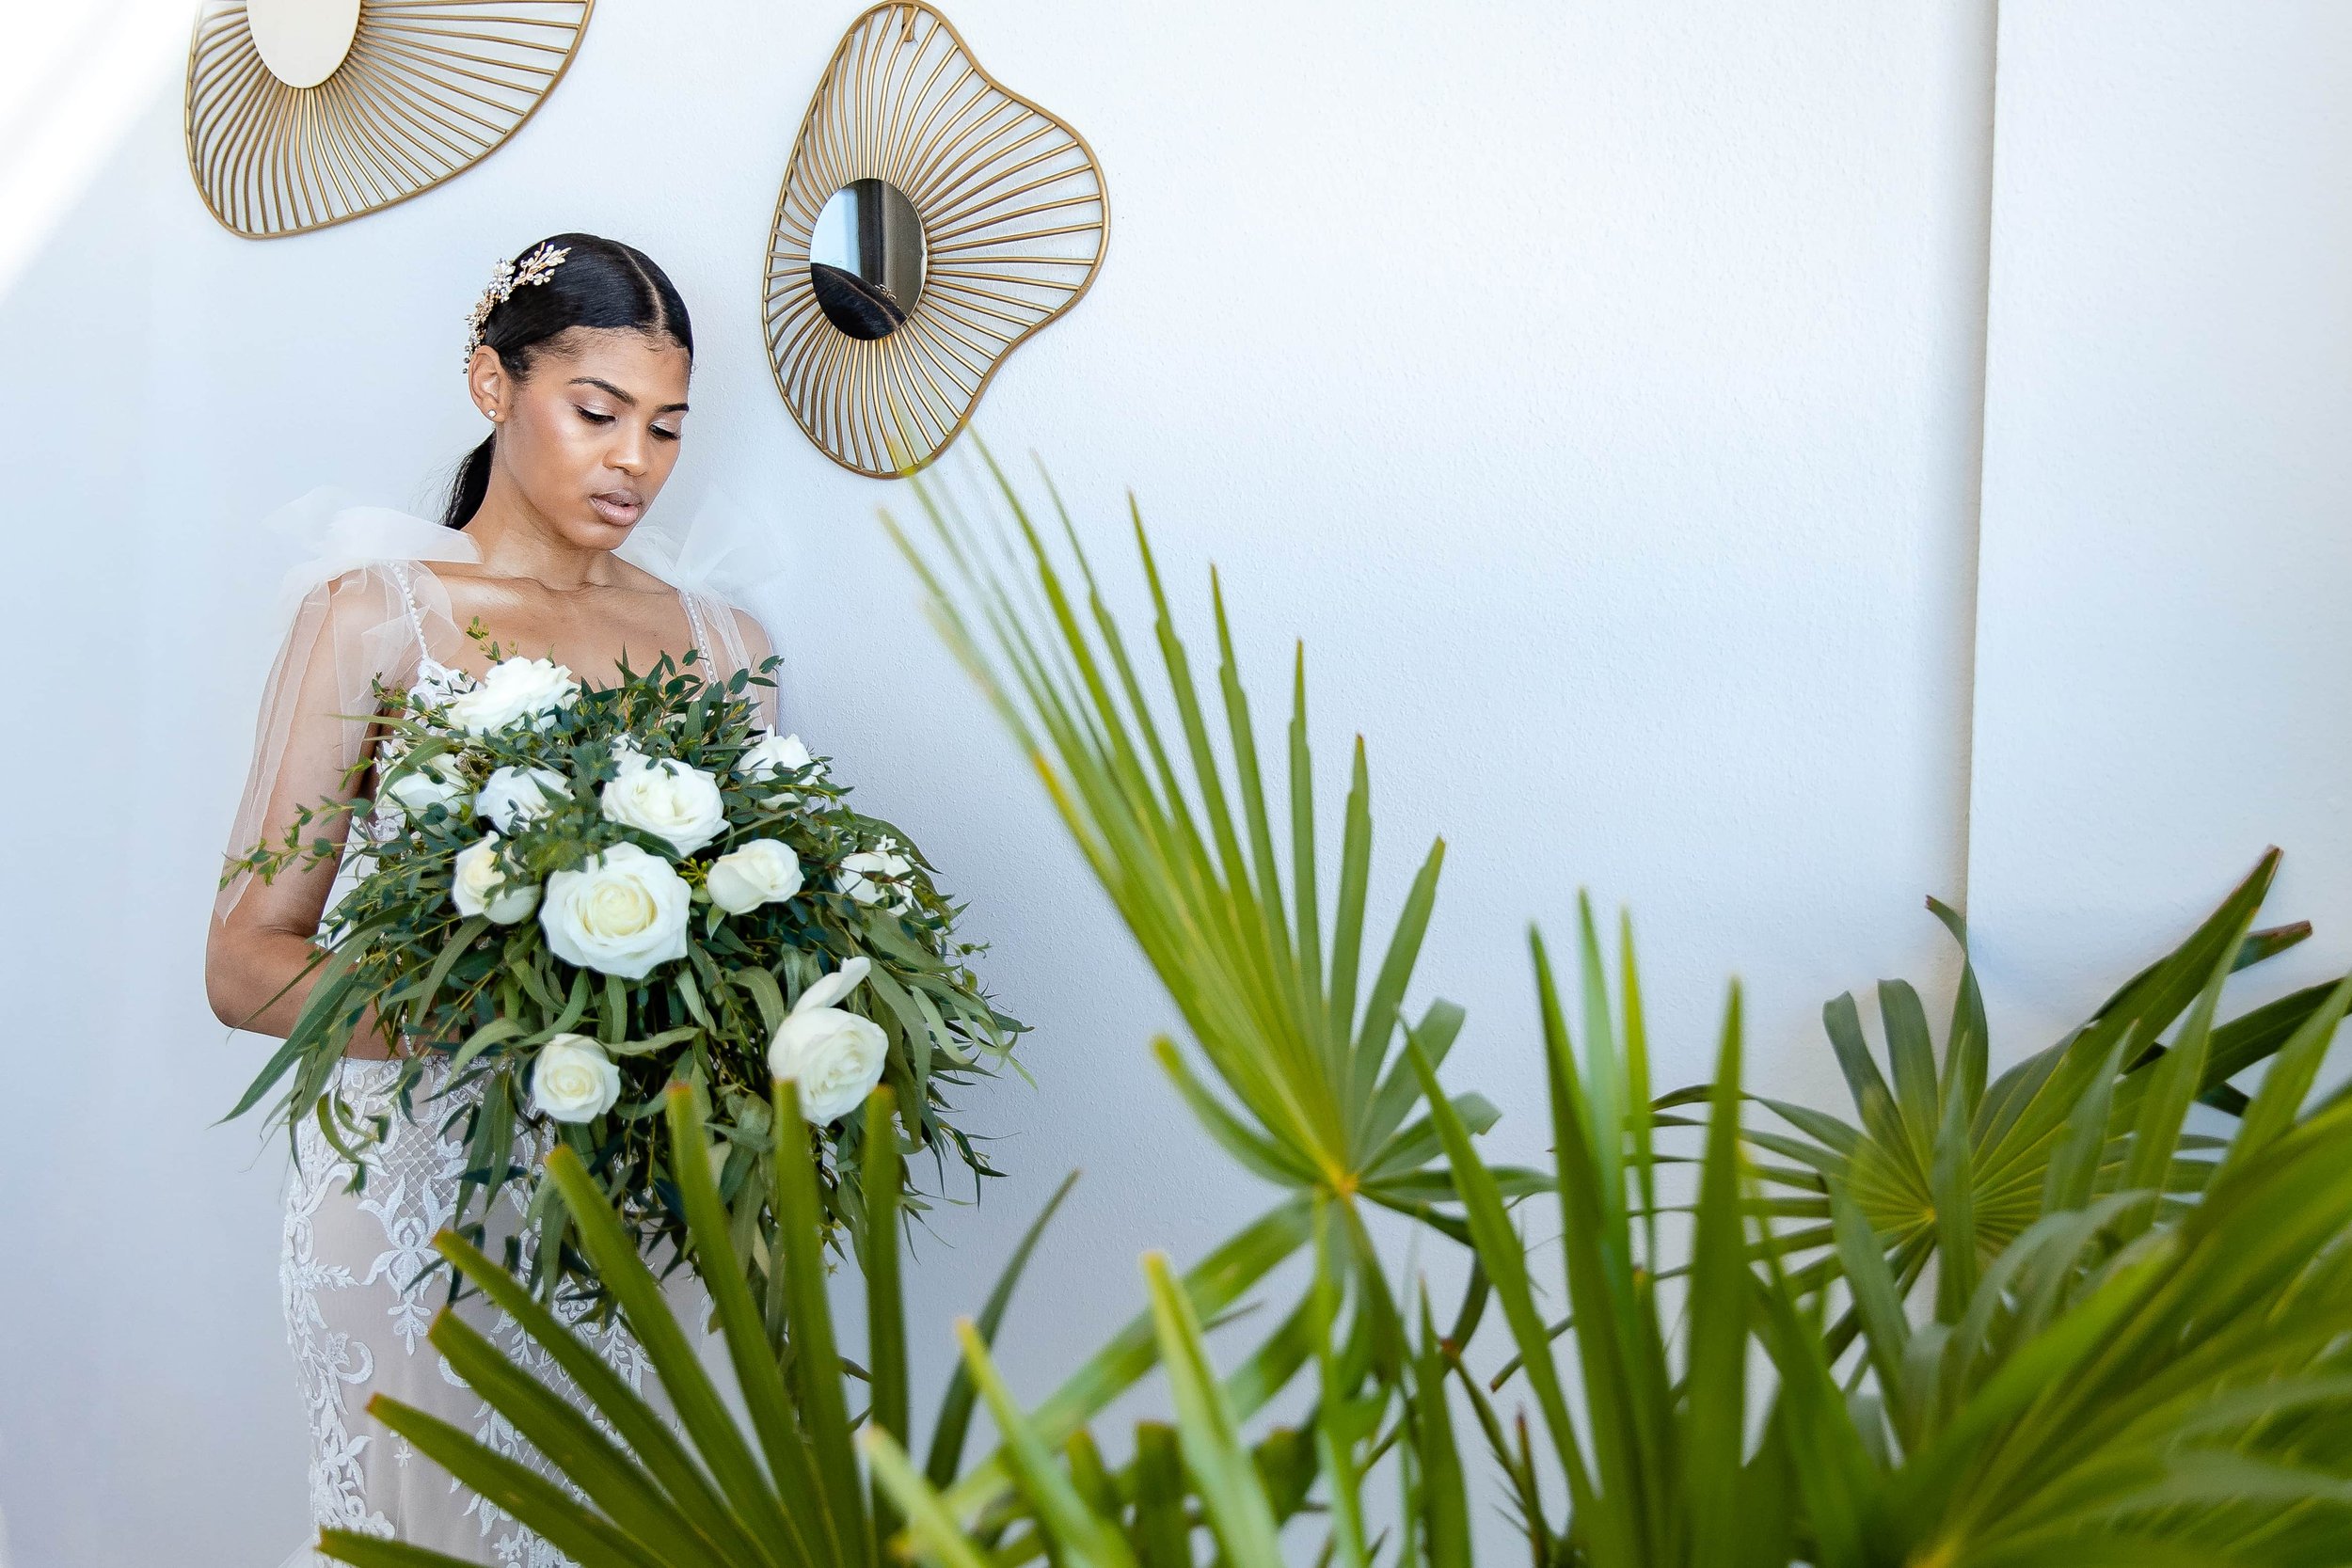  A bride in a lace gown and veil holds a large bouquet of white flowers, standing beside decorative plants and wall-mounted abstract art. 